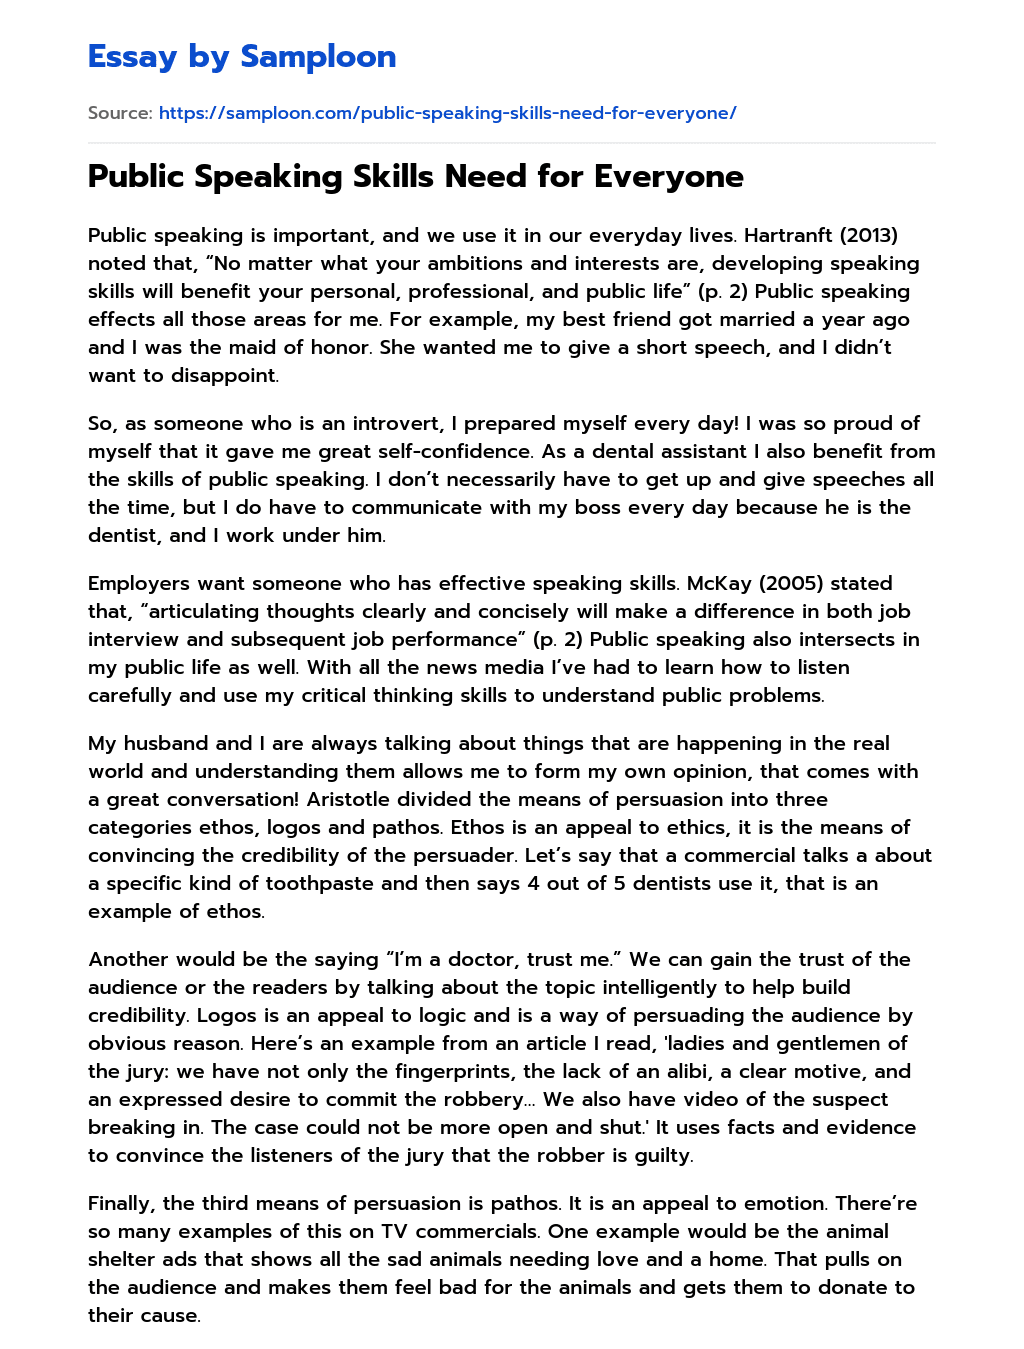 Public Speaking Skills Need for Everyone essay